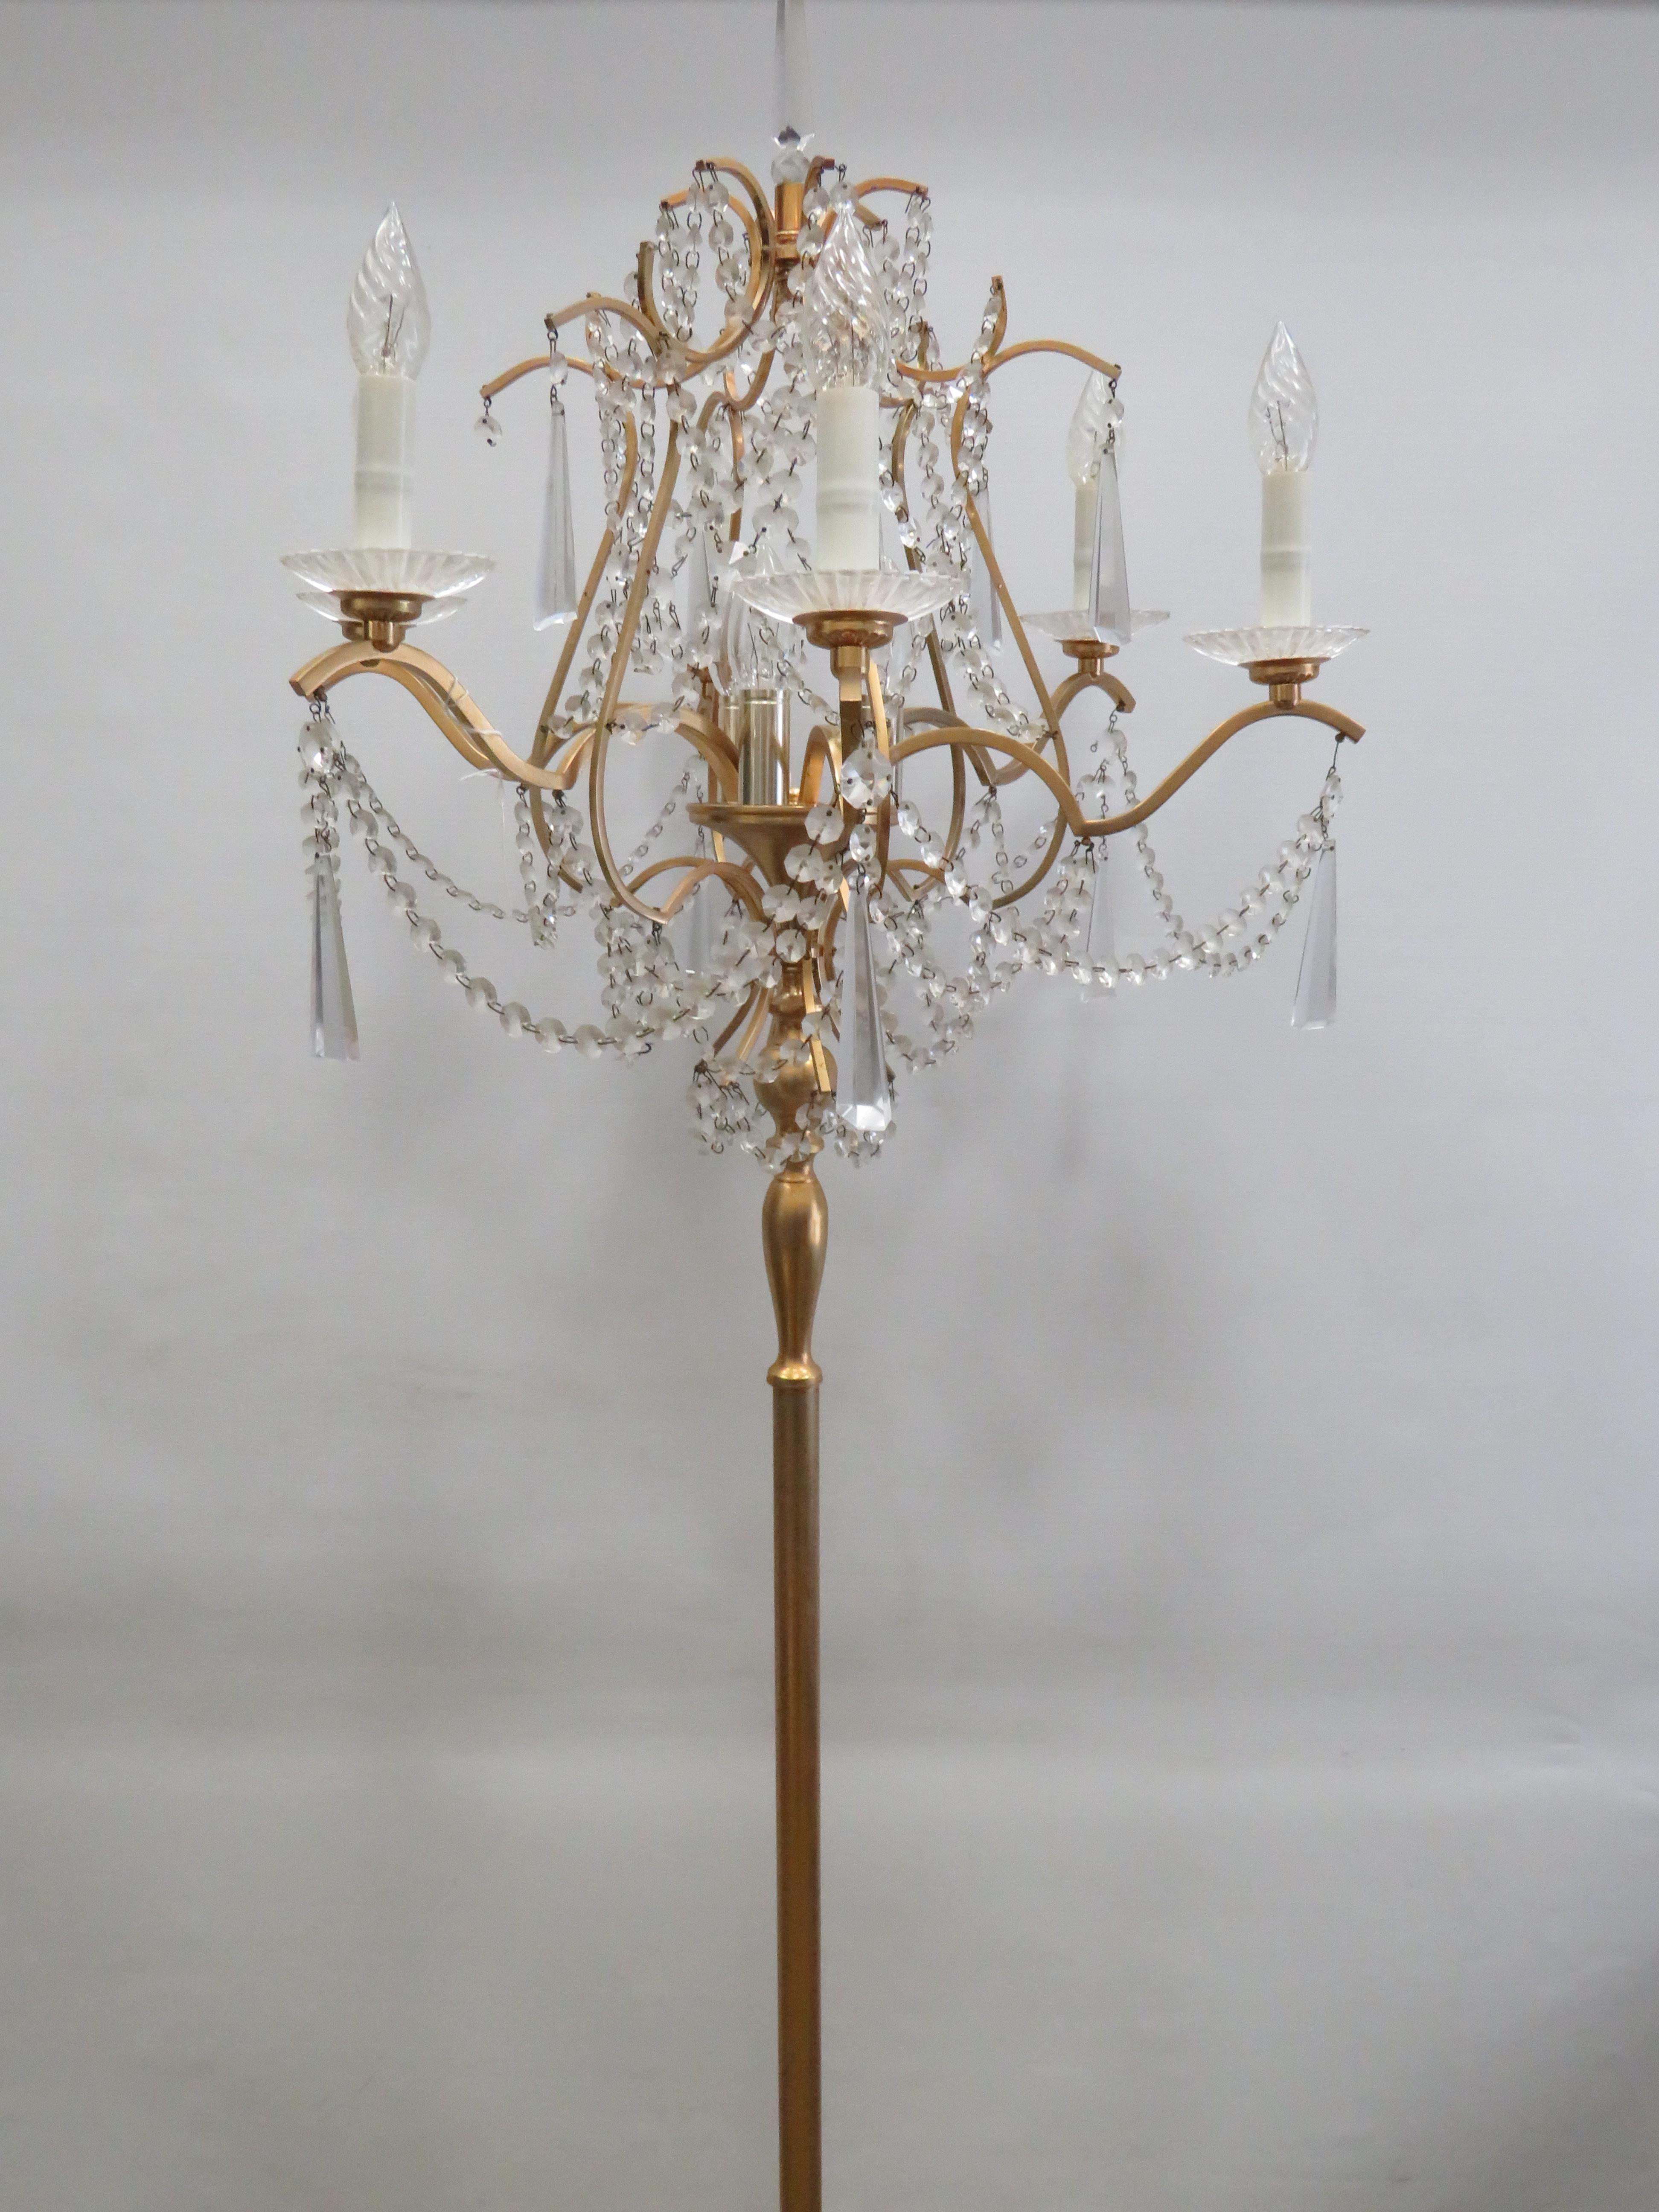 Brushed metal brass effect Standard lamp with 9 Candle bulbs and hanging glass lustres. Approx 67 in - Image 4 of 7